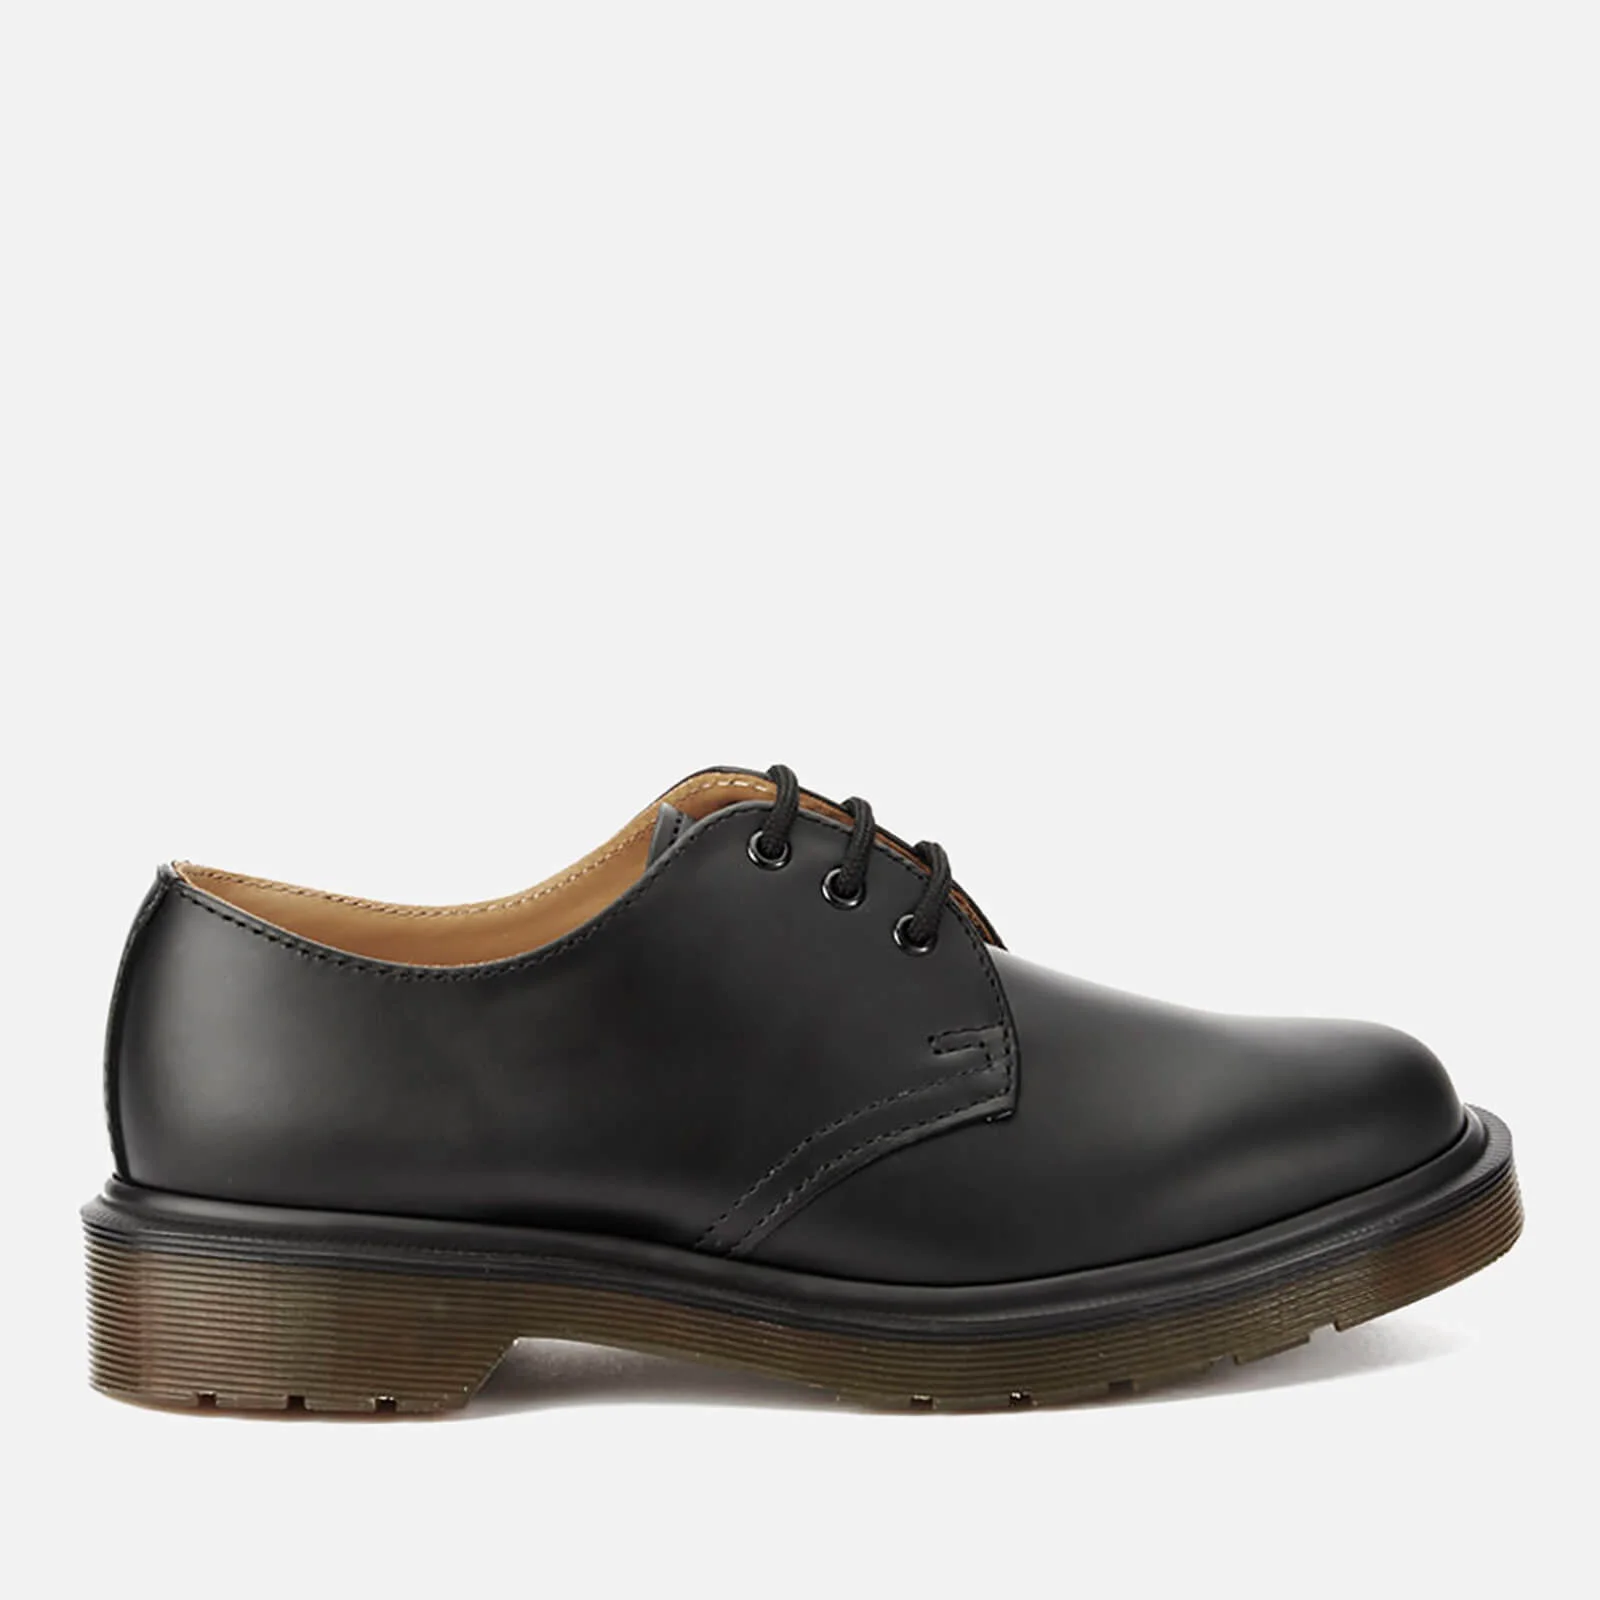 Dr. Martens 1461 PW Smooth Leather Narrow Fit 3-Eye Shoes - Black  Image 1